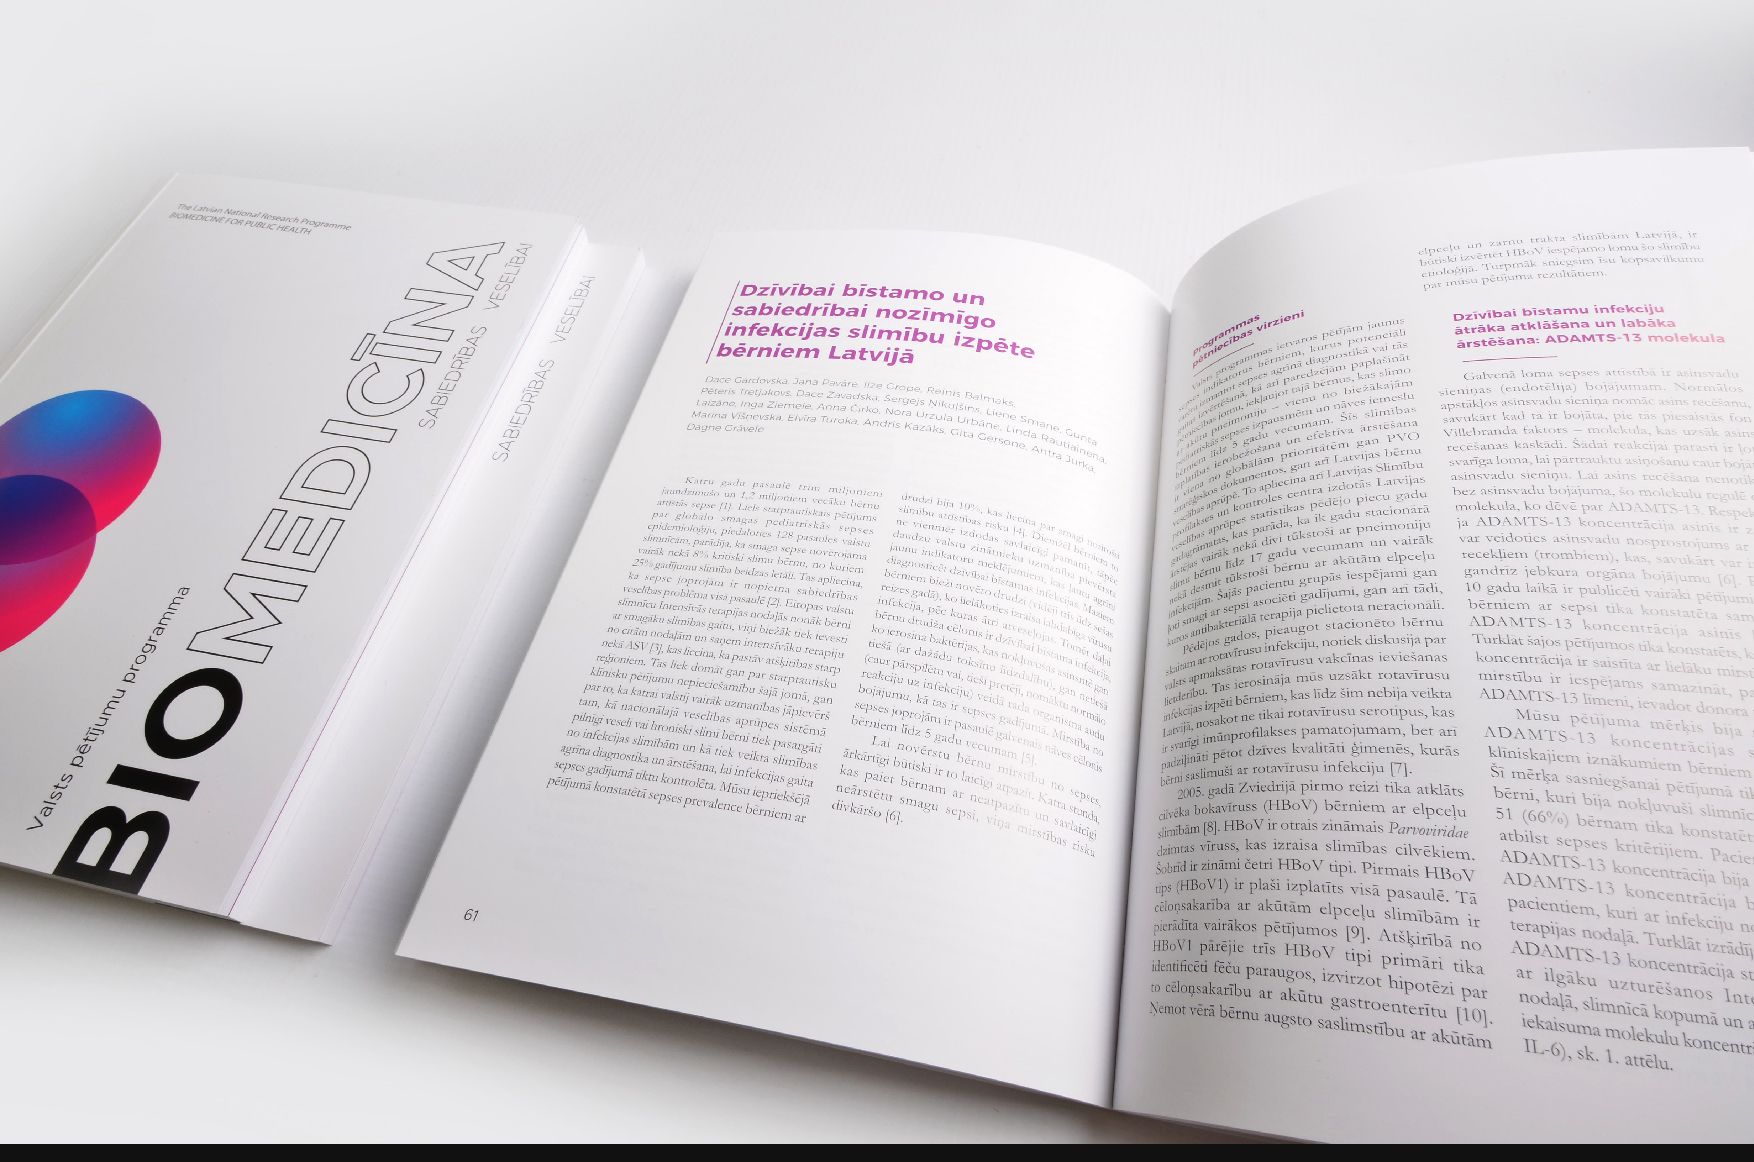 "BIOMEDICINE FOR PUBLIC HEALTH" book and layout design